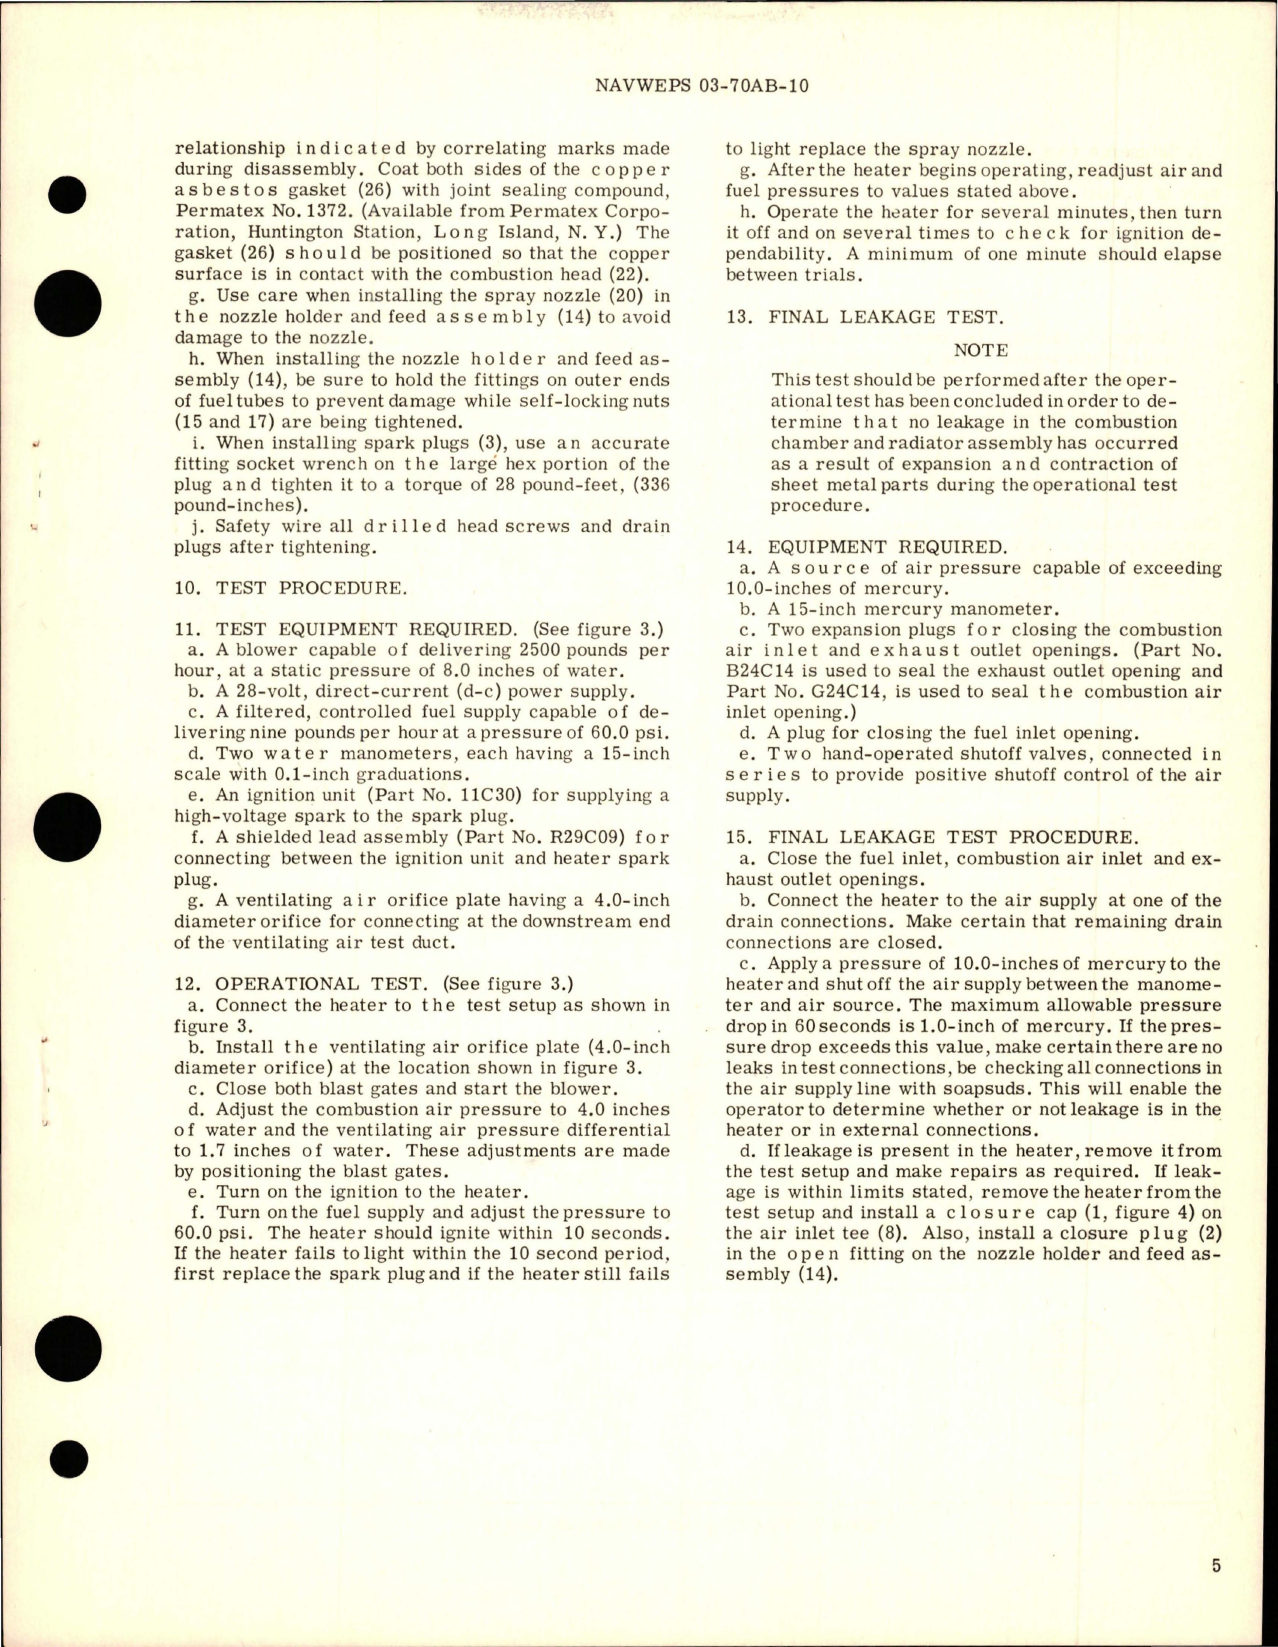 Sample page 5 from AirCorps Library document: Overhaul Instructions w Parts Breakdown for Aircraft Heaters - Part 52C90 - Type S-100 